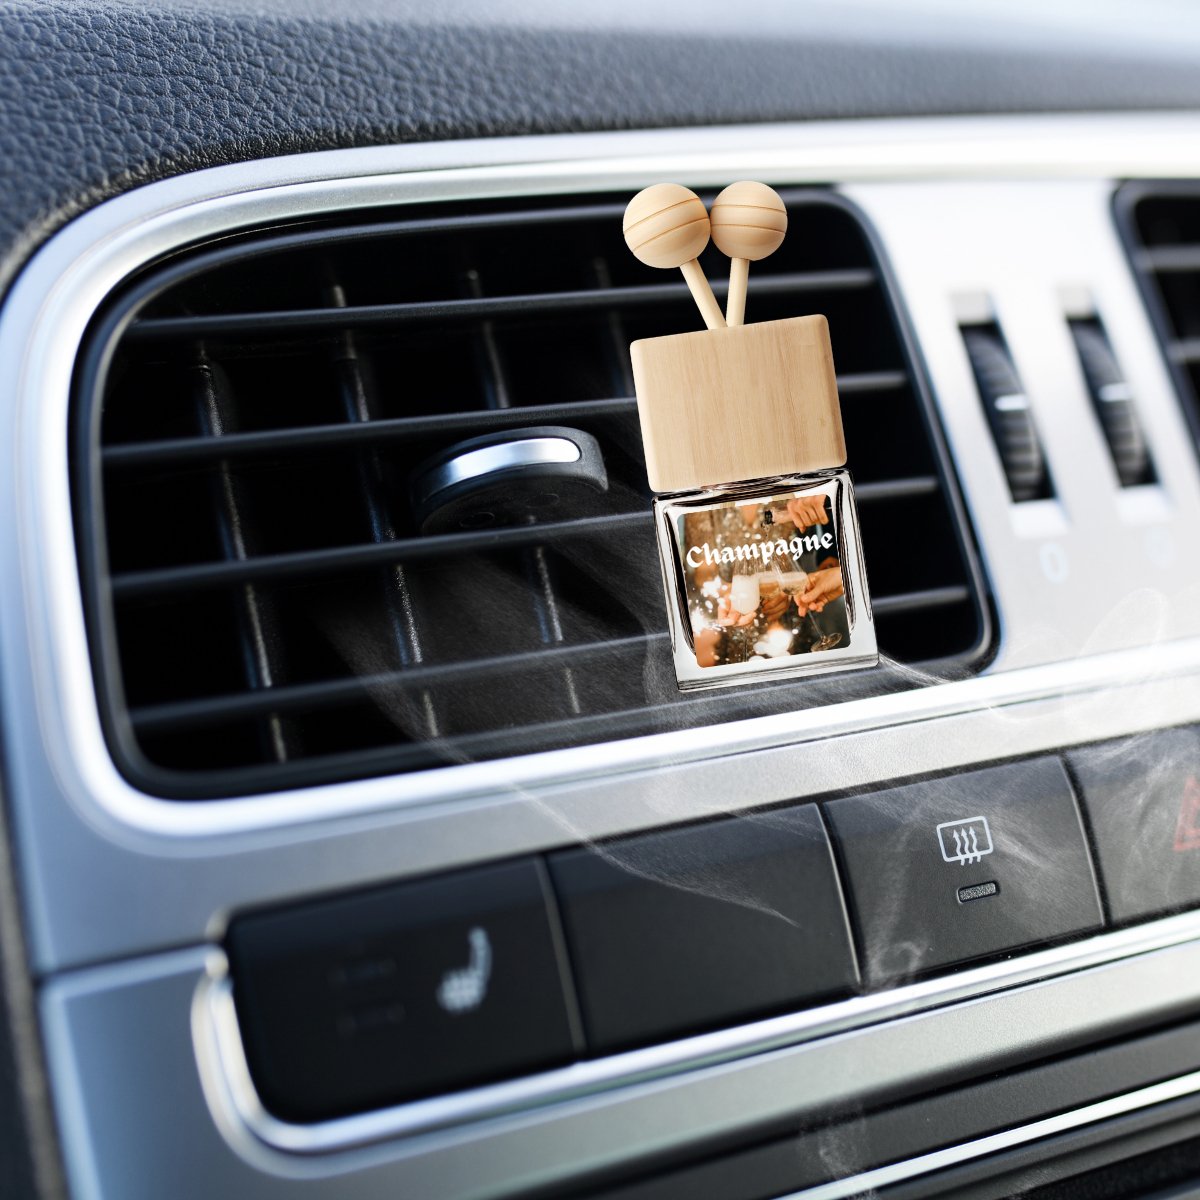 Champagne Scented Car Vent Air Freshener - Scents More